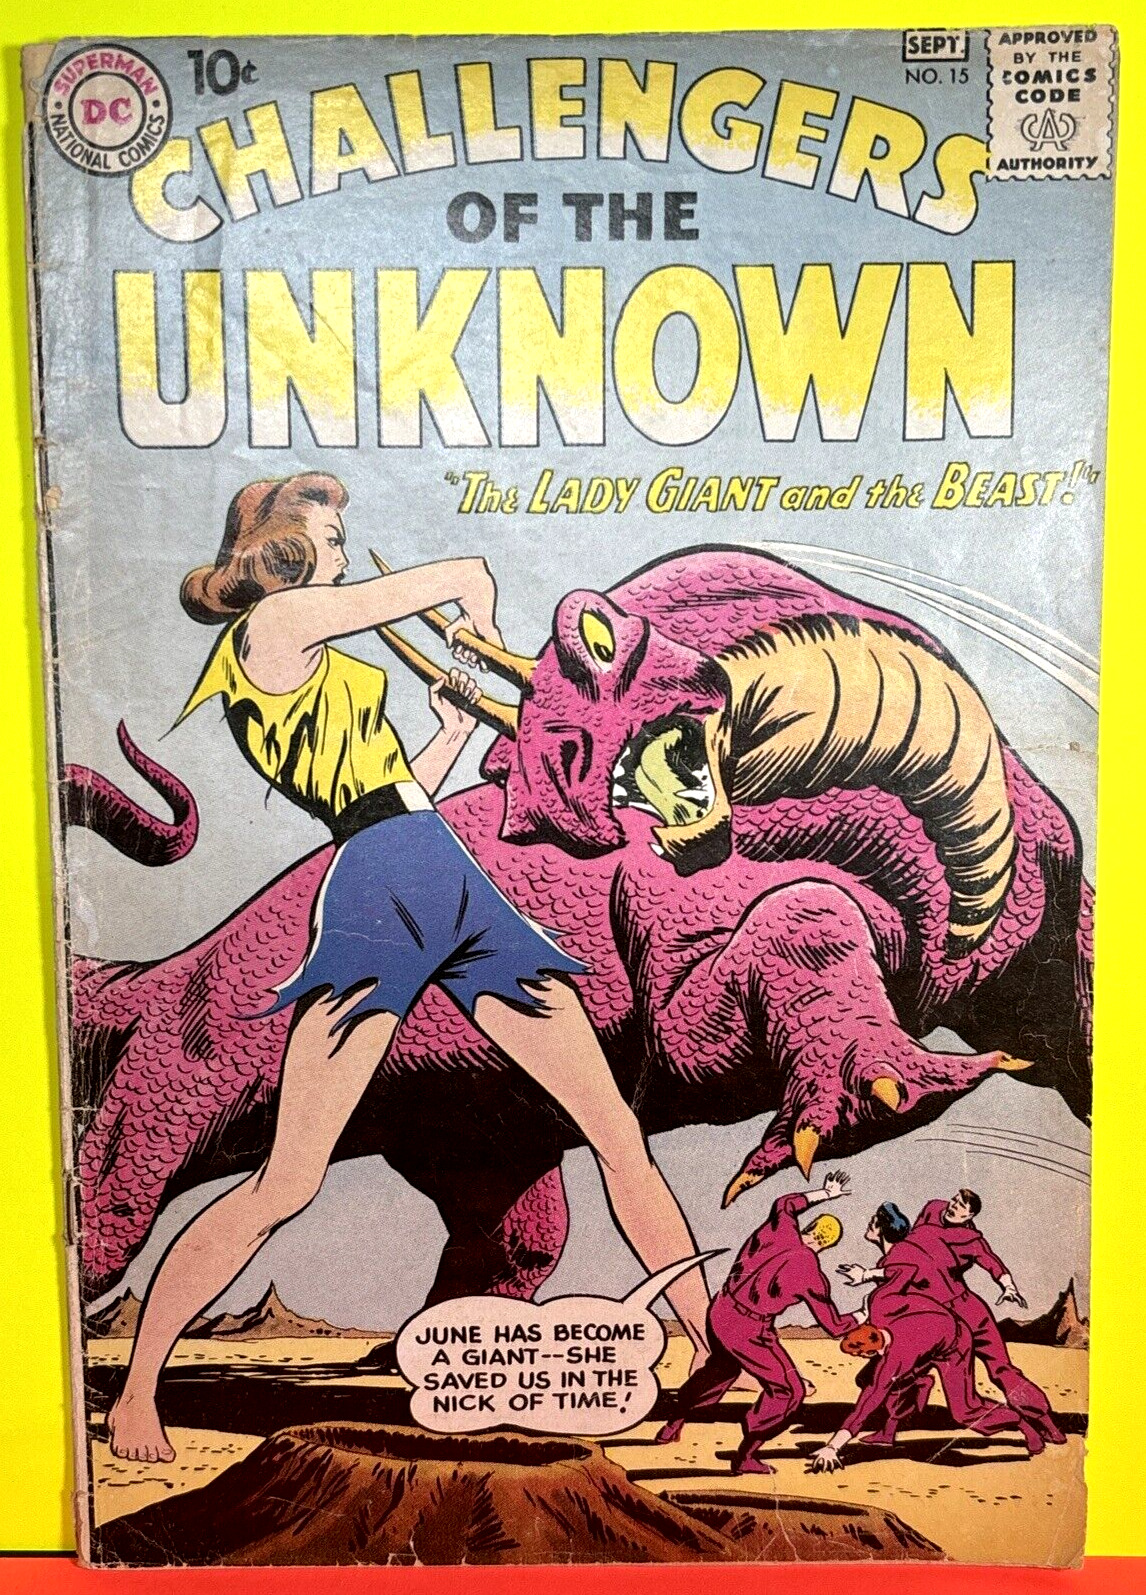 1960 “CHALLENGERS OF THE UNKNOWN” DC Comic Book No. 15 Lady Giant & The Beast